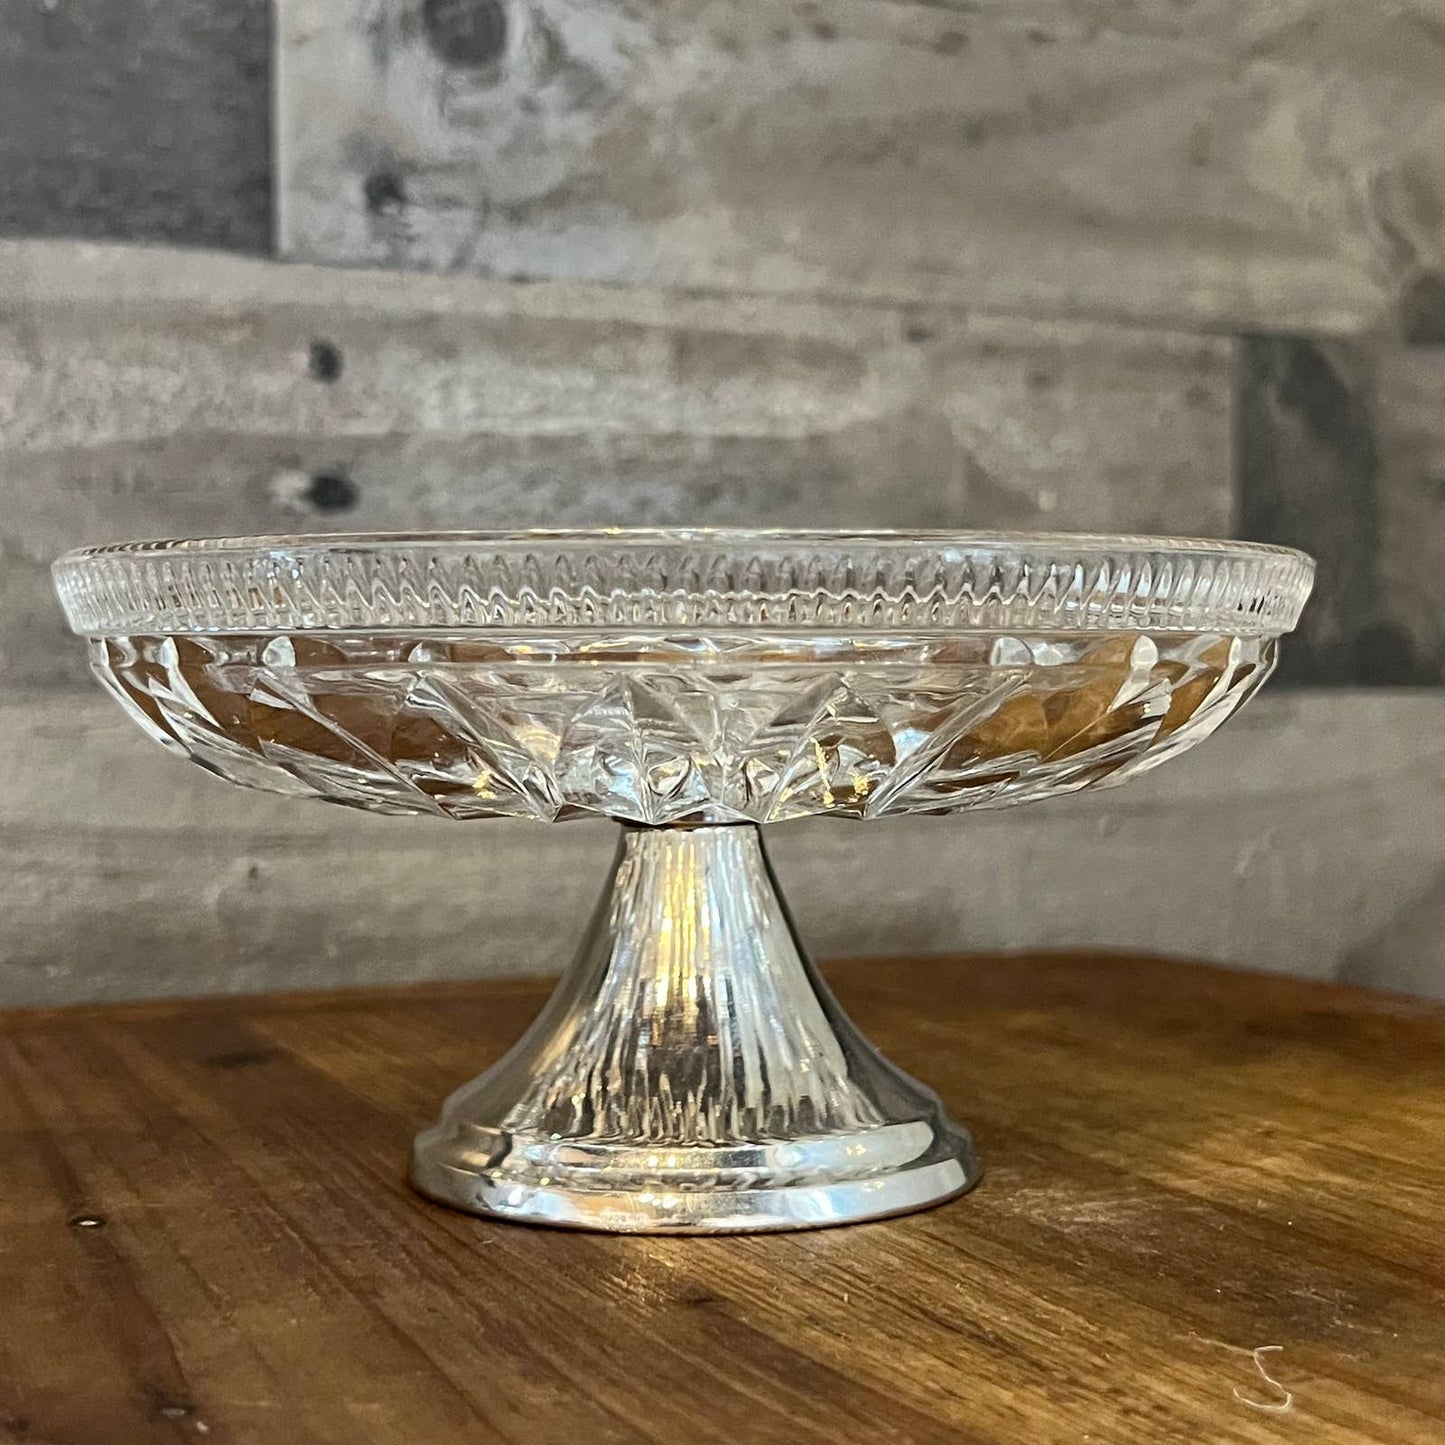 Vintage crystal compote dish with silver plated pedestal base